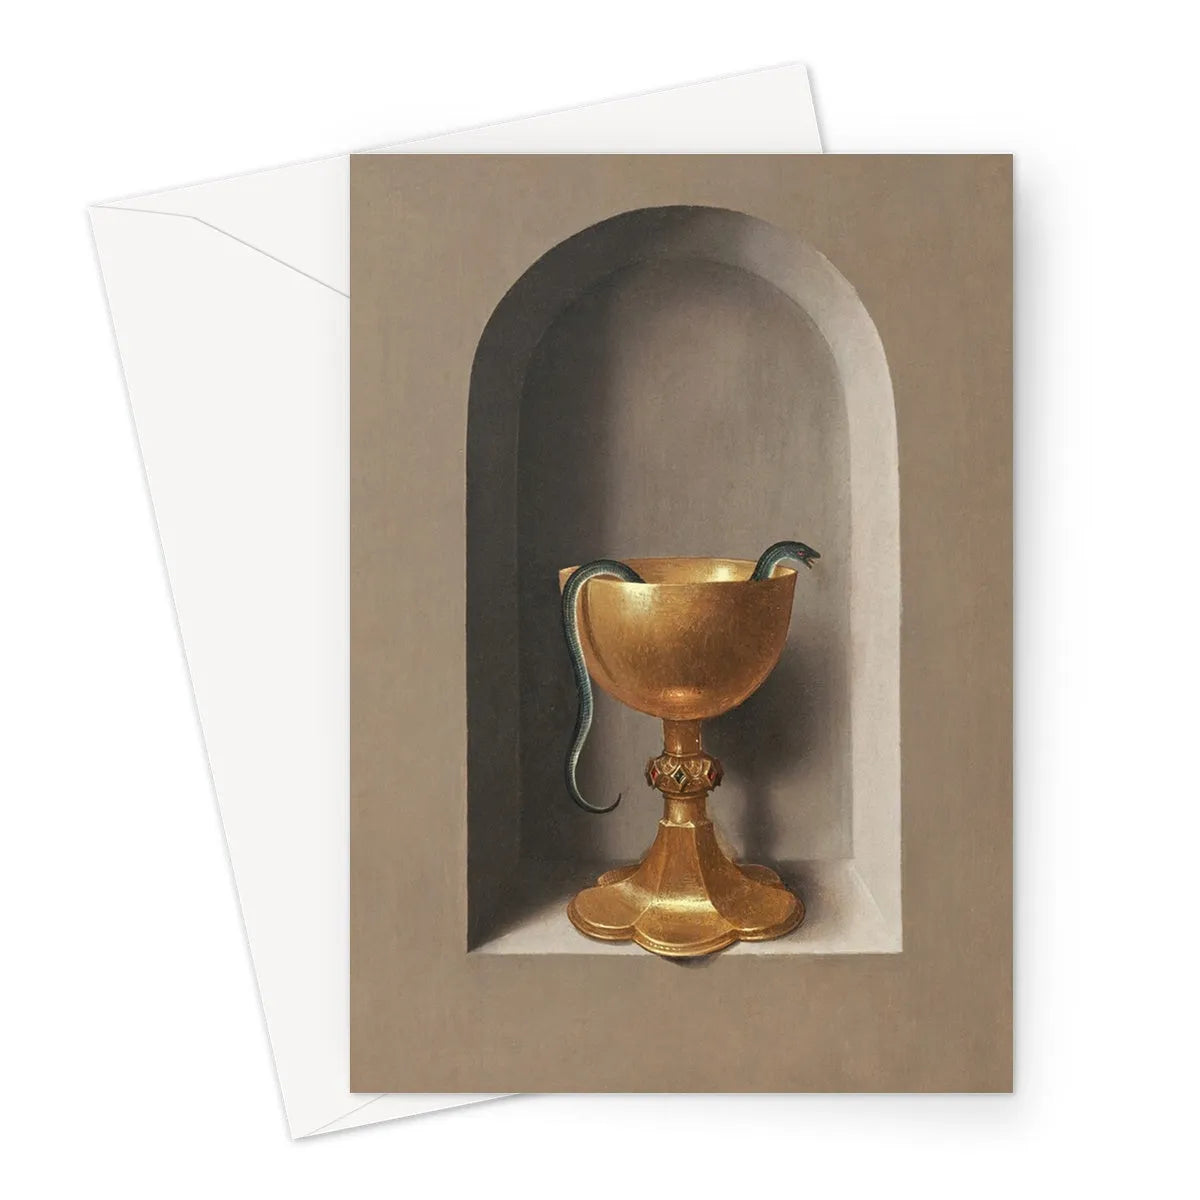 Chalice Of Saint John The Evangelist By Hans Memling Greeting Card - A5 Portrait / 1 Card - Notebooks & Notepads